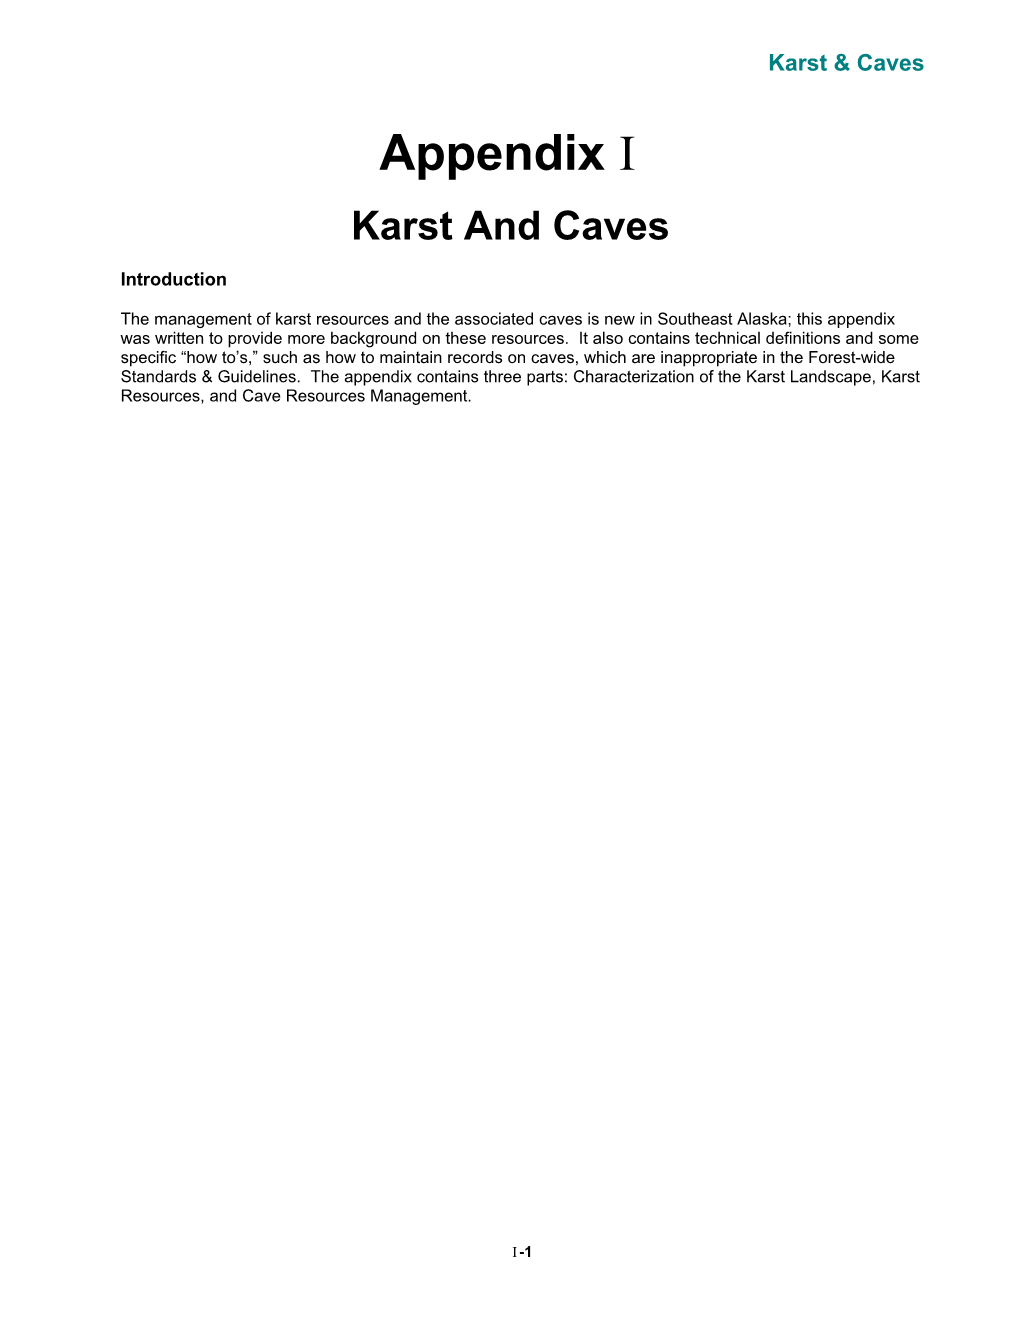 Karst and Caves